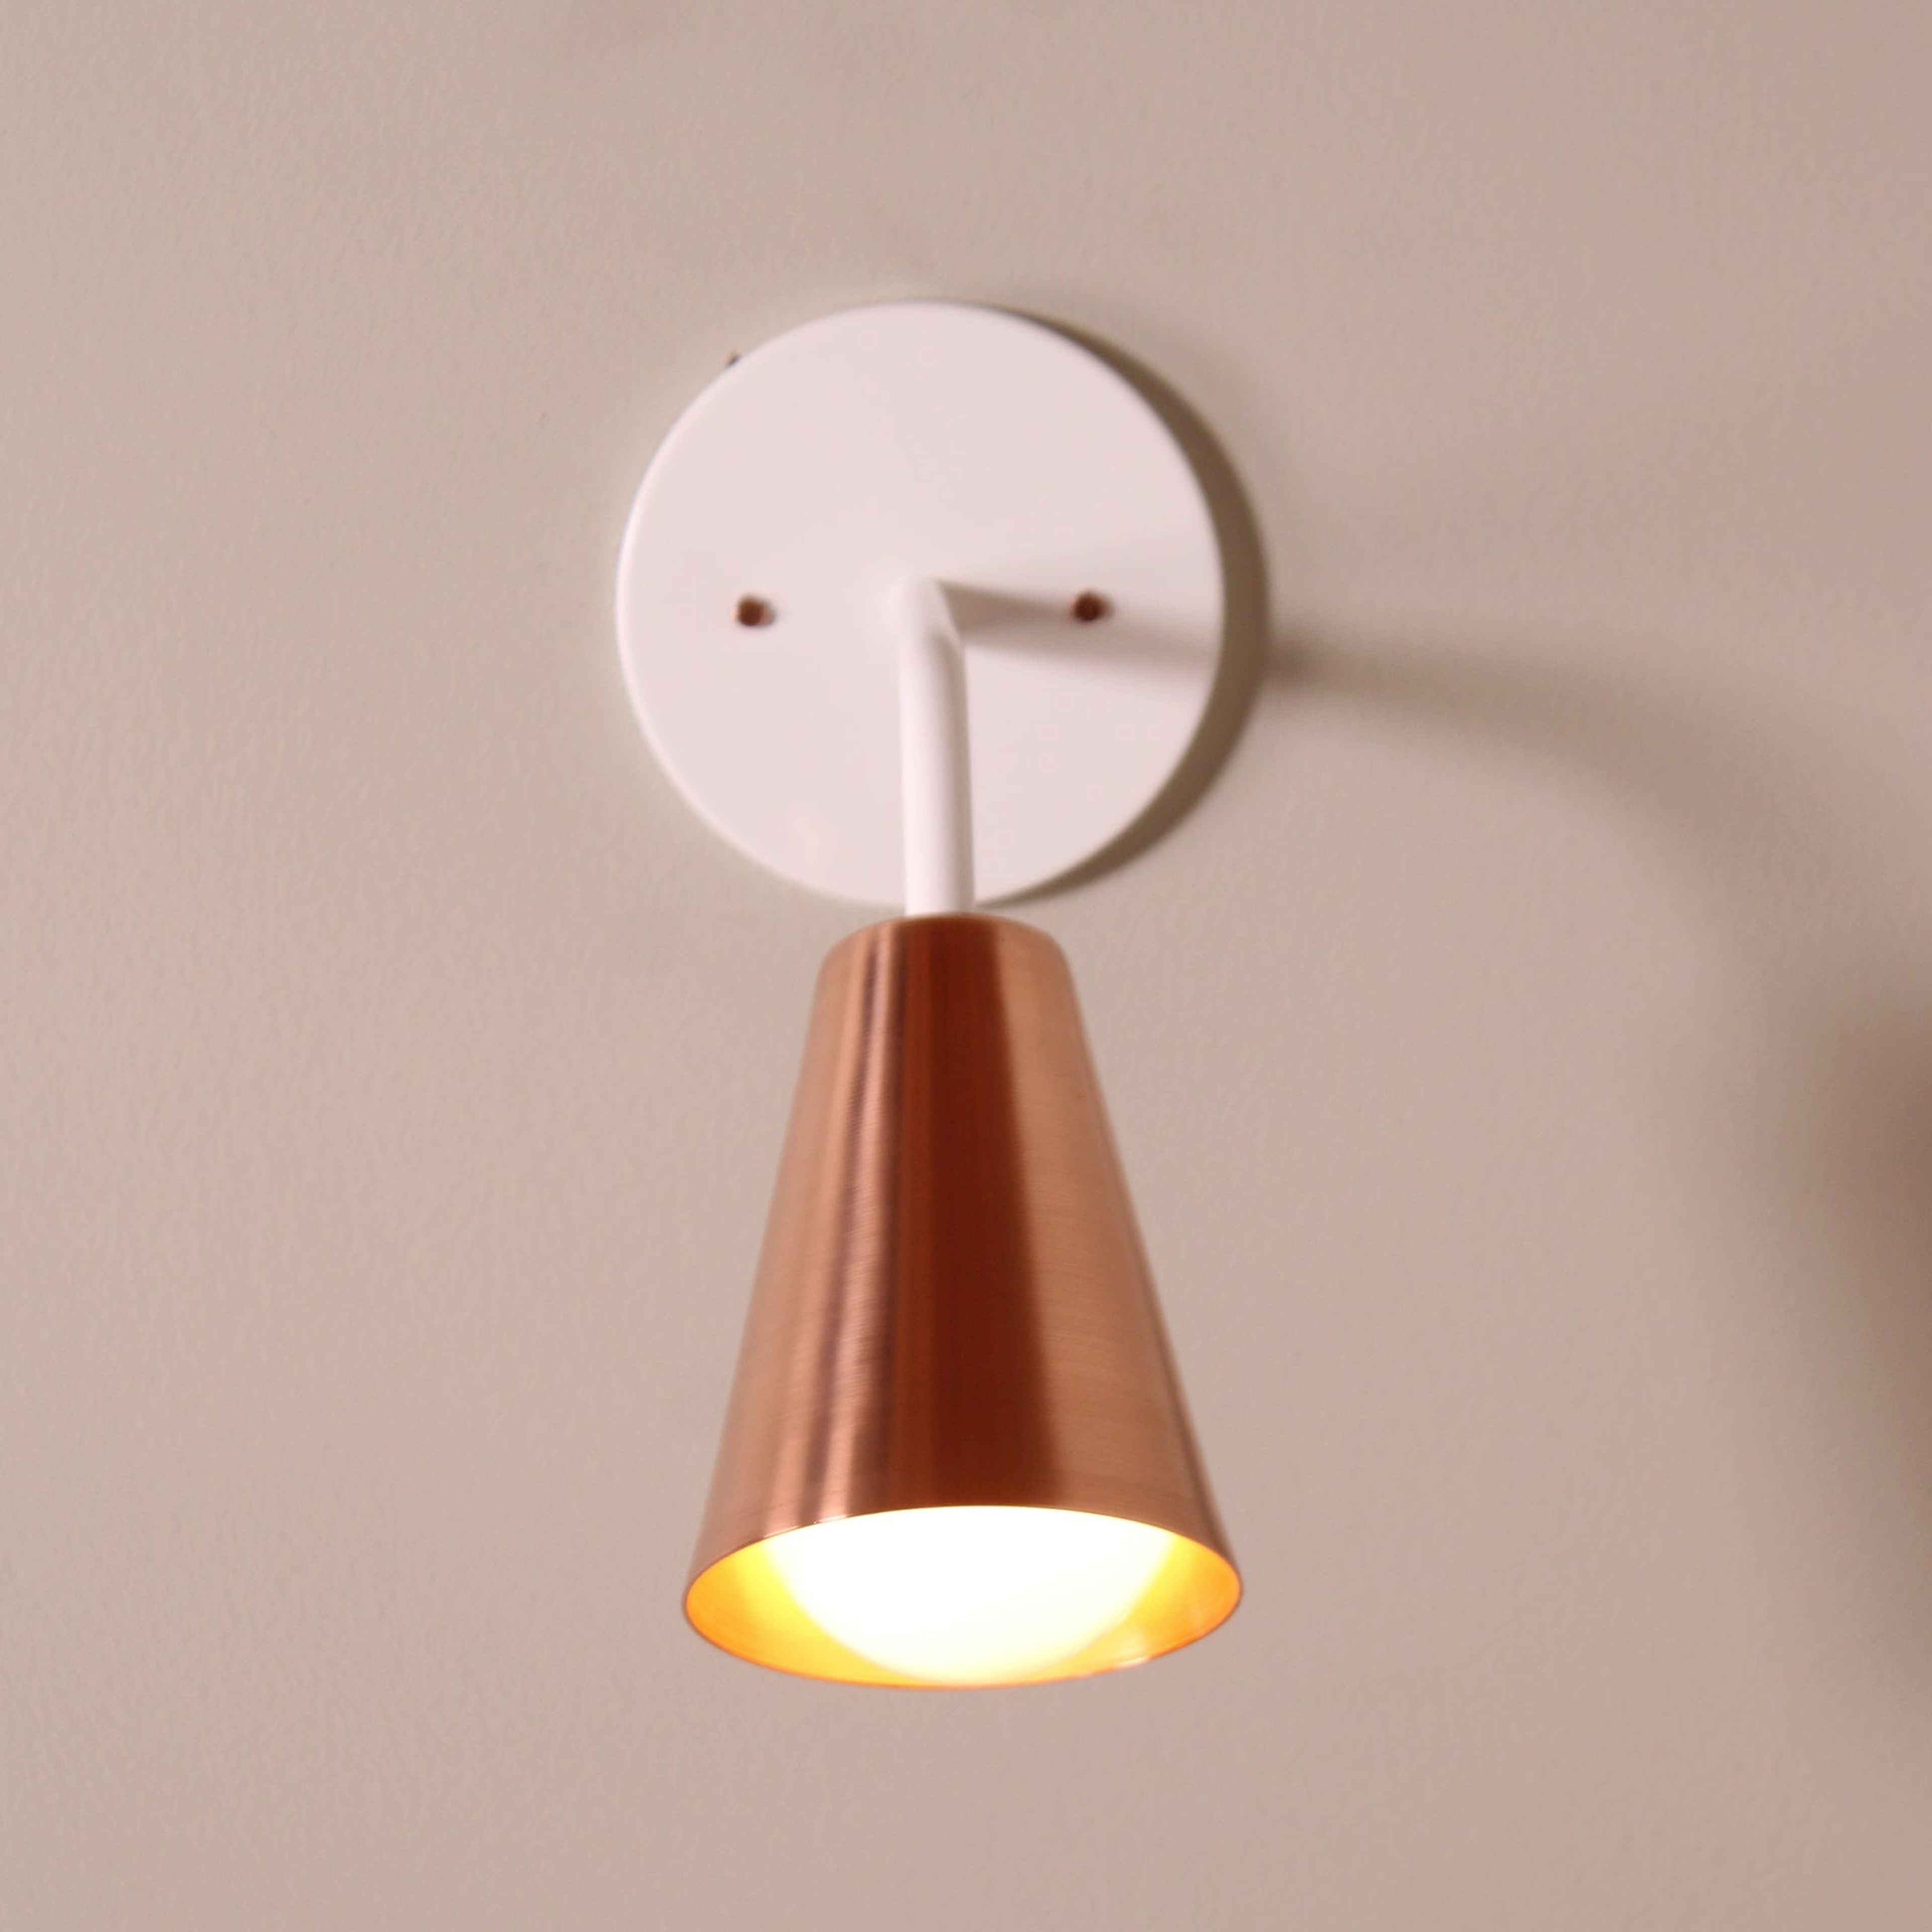 Monte Carlo wall sconce